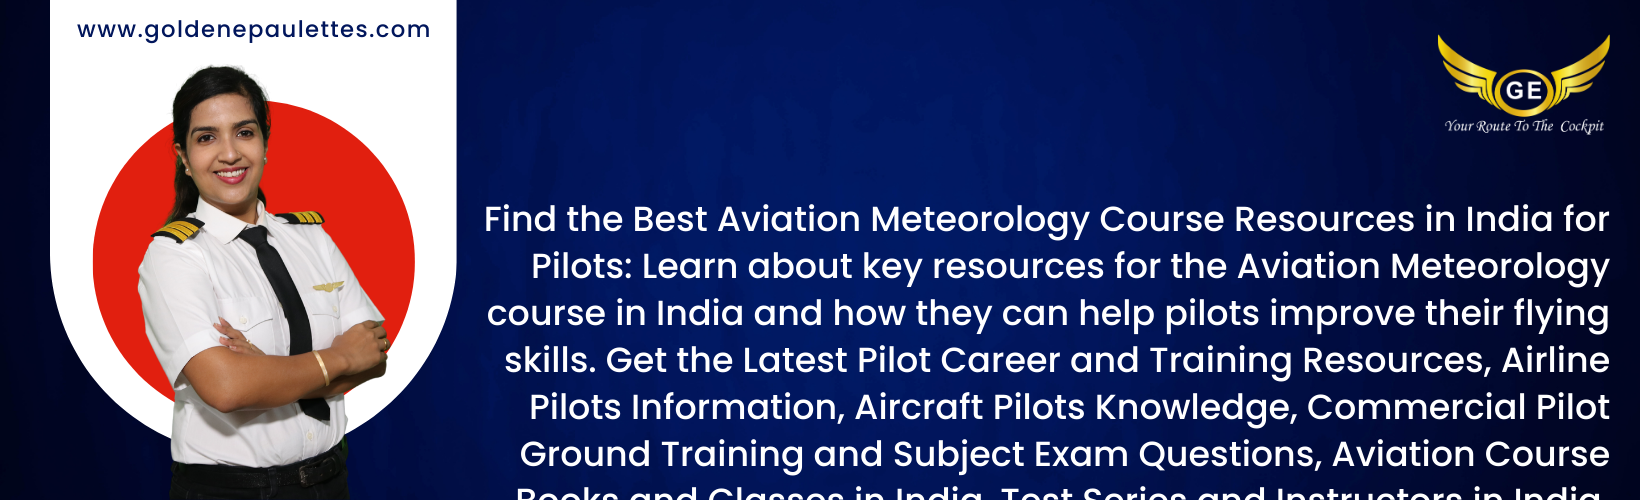 Aircraft Pilots and Aviation Meteorology Course